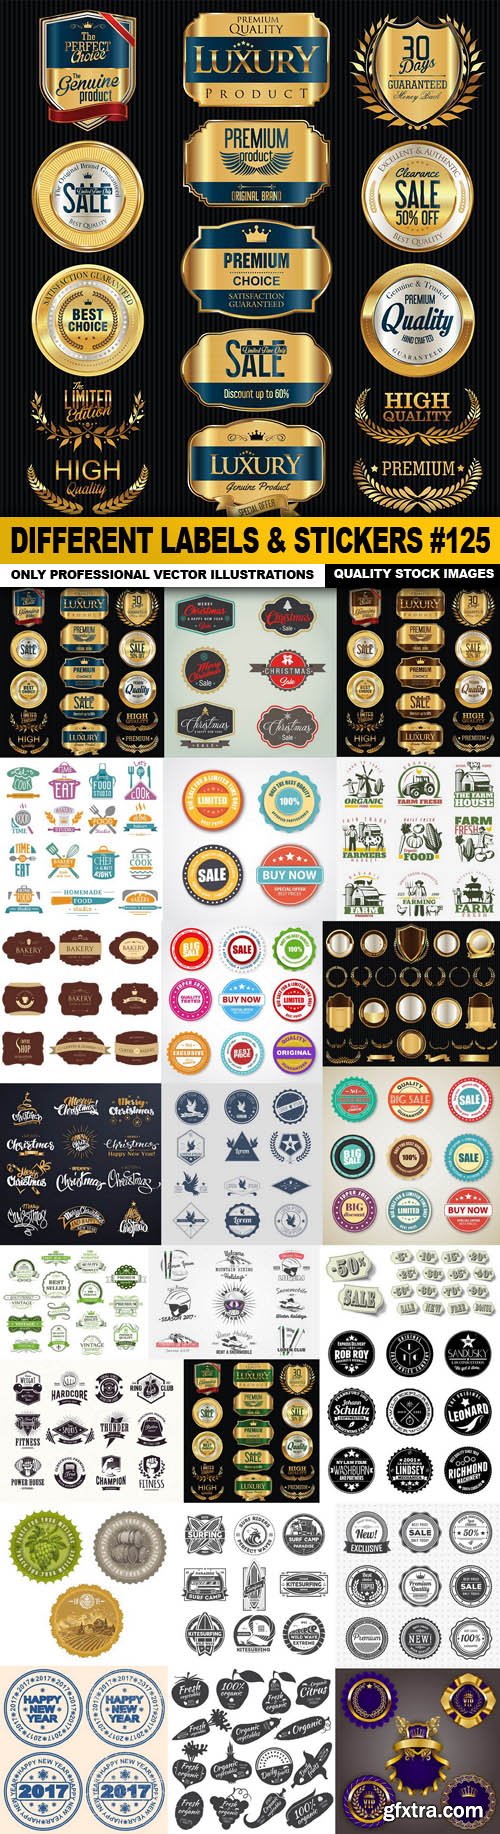 Different Labels & Stickers #125 - 25 Vector